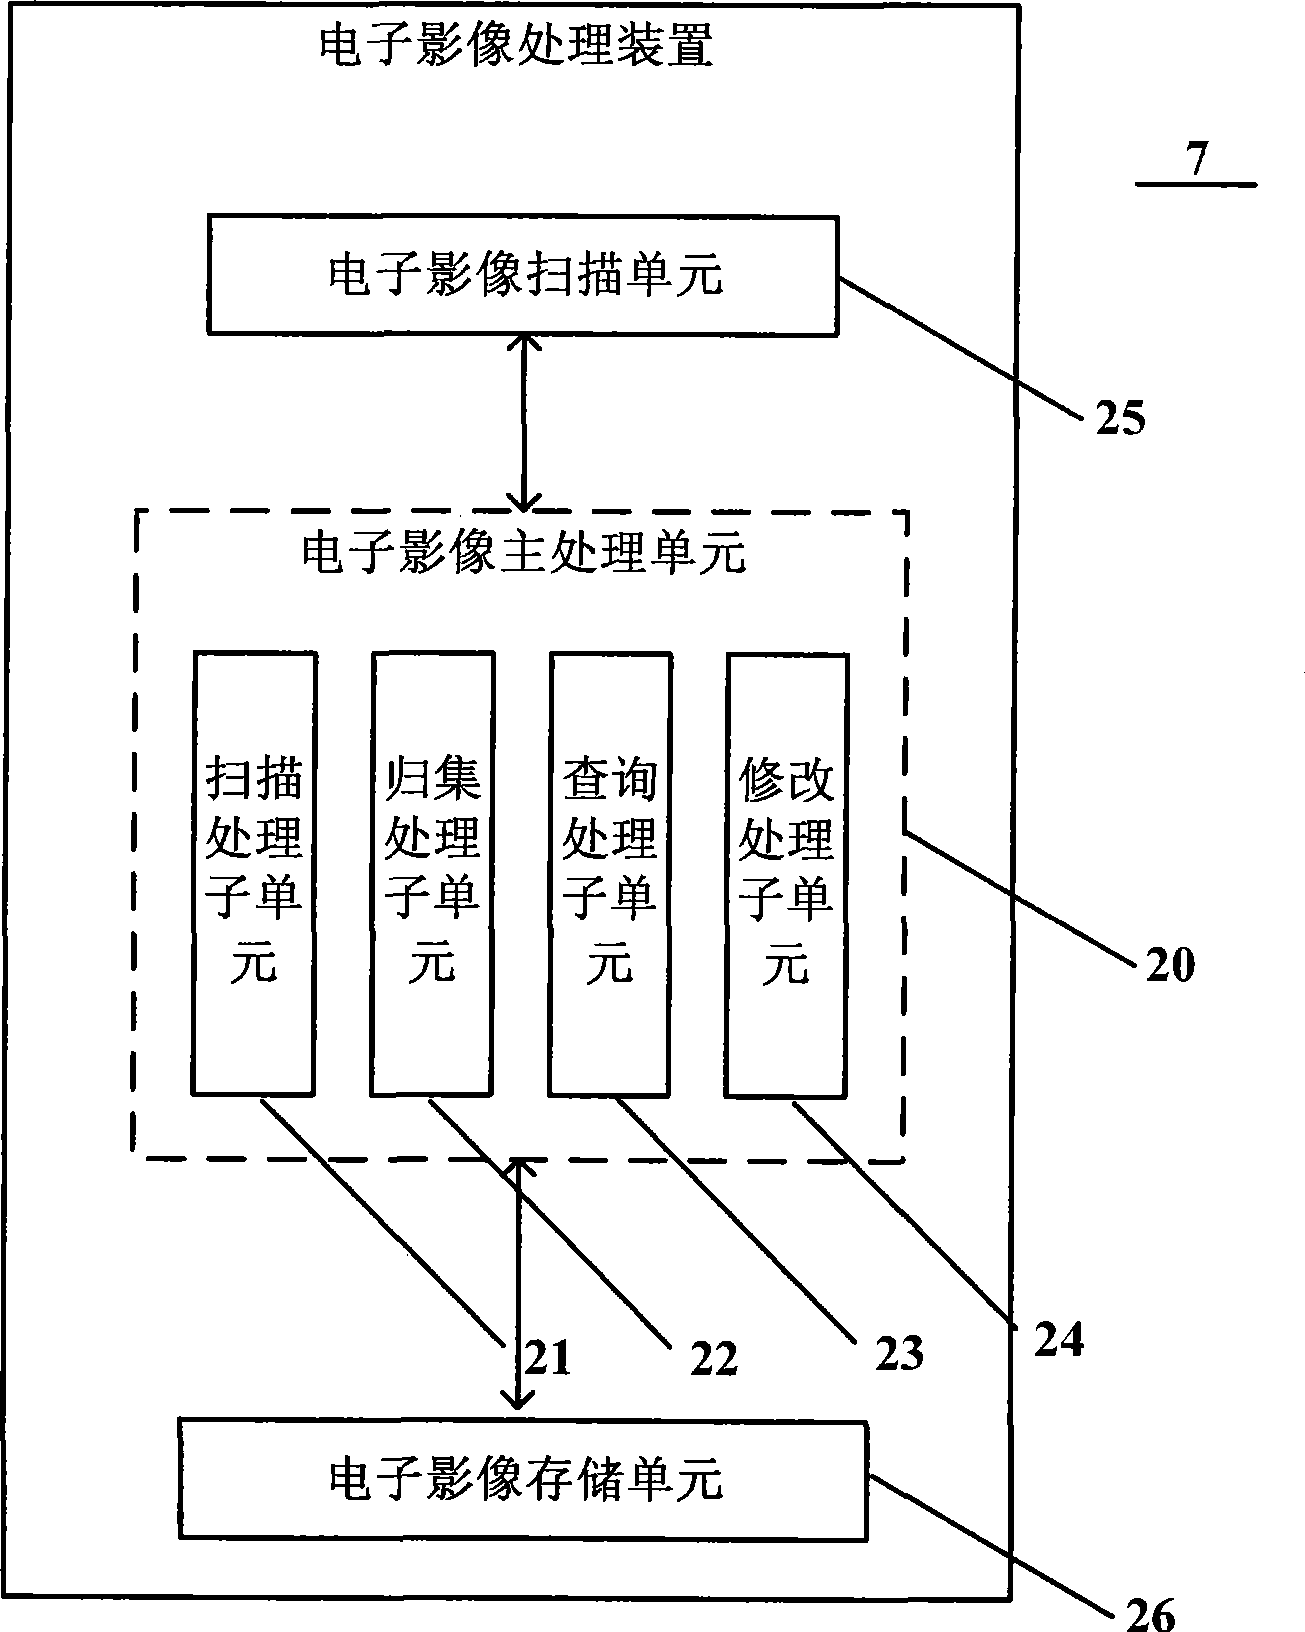 System and method for examining and approving credit card vending based on electronic image technology